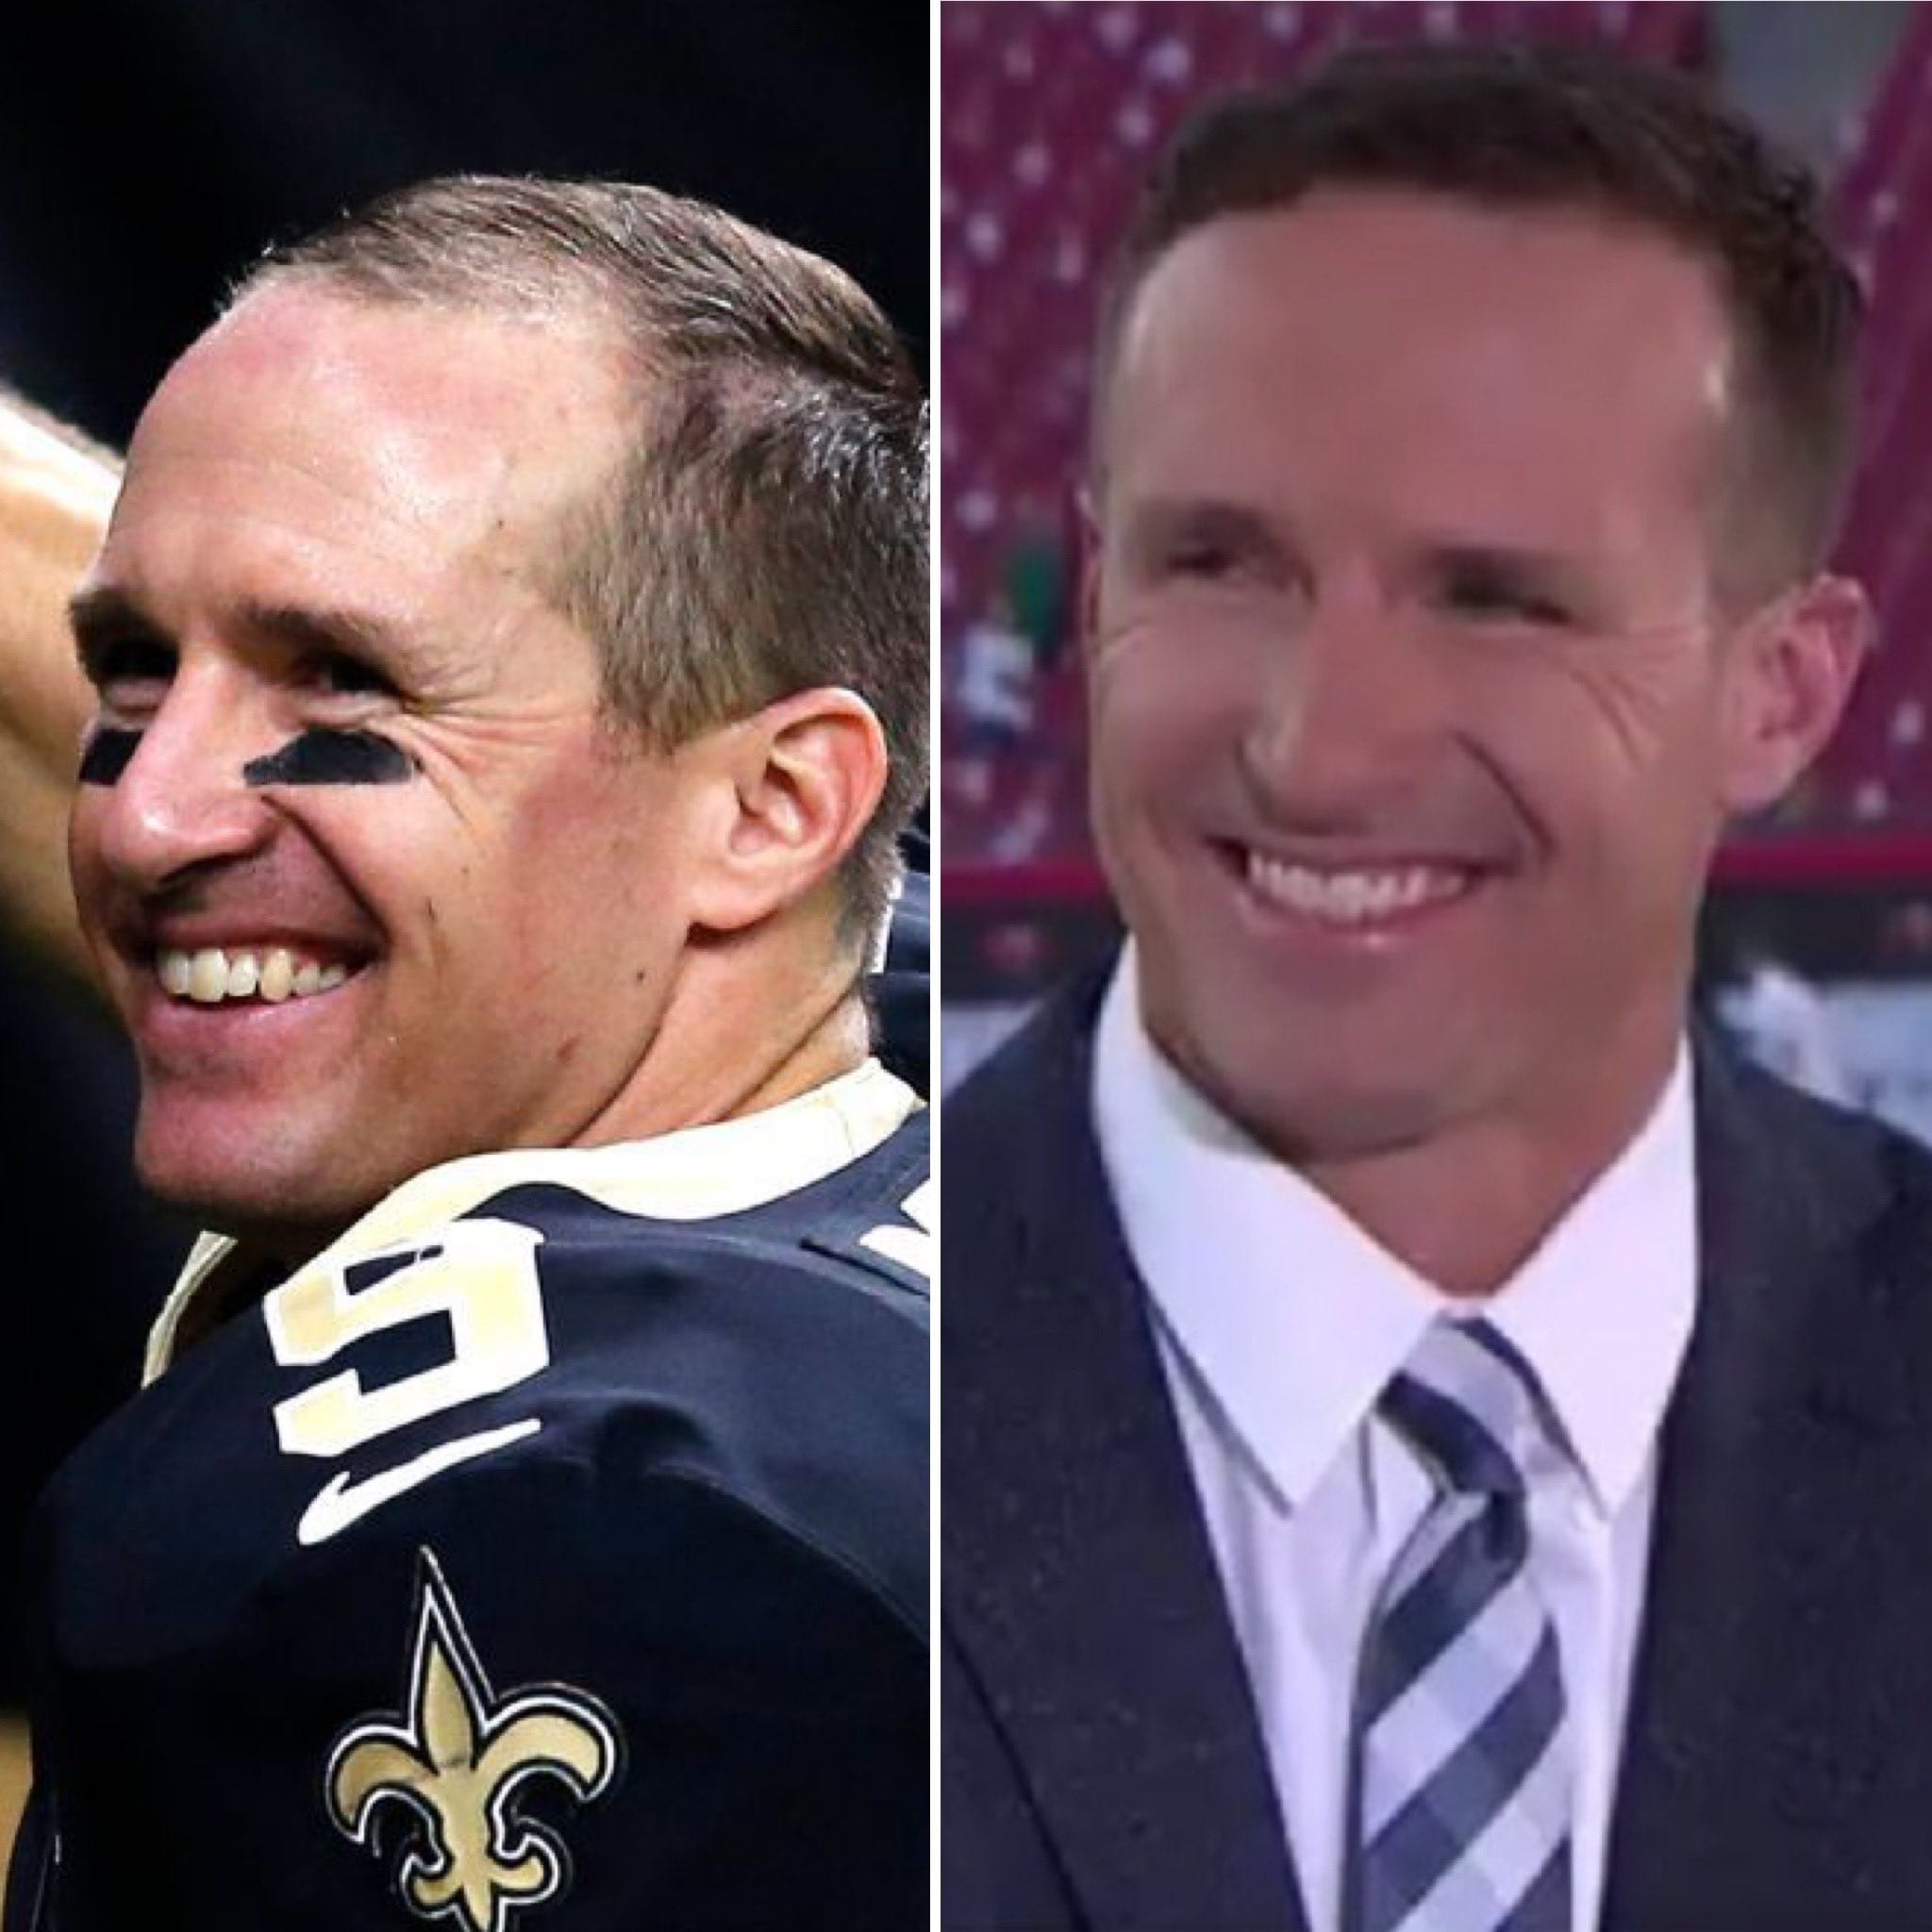 Drew Brees Hair Transplant Before & After